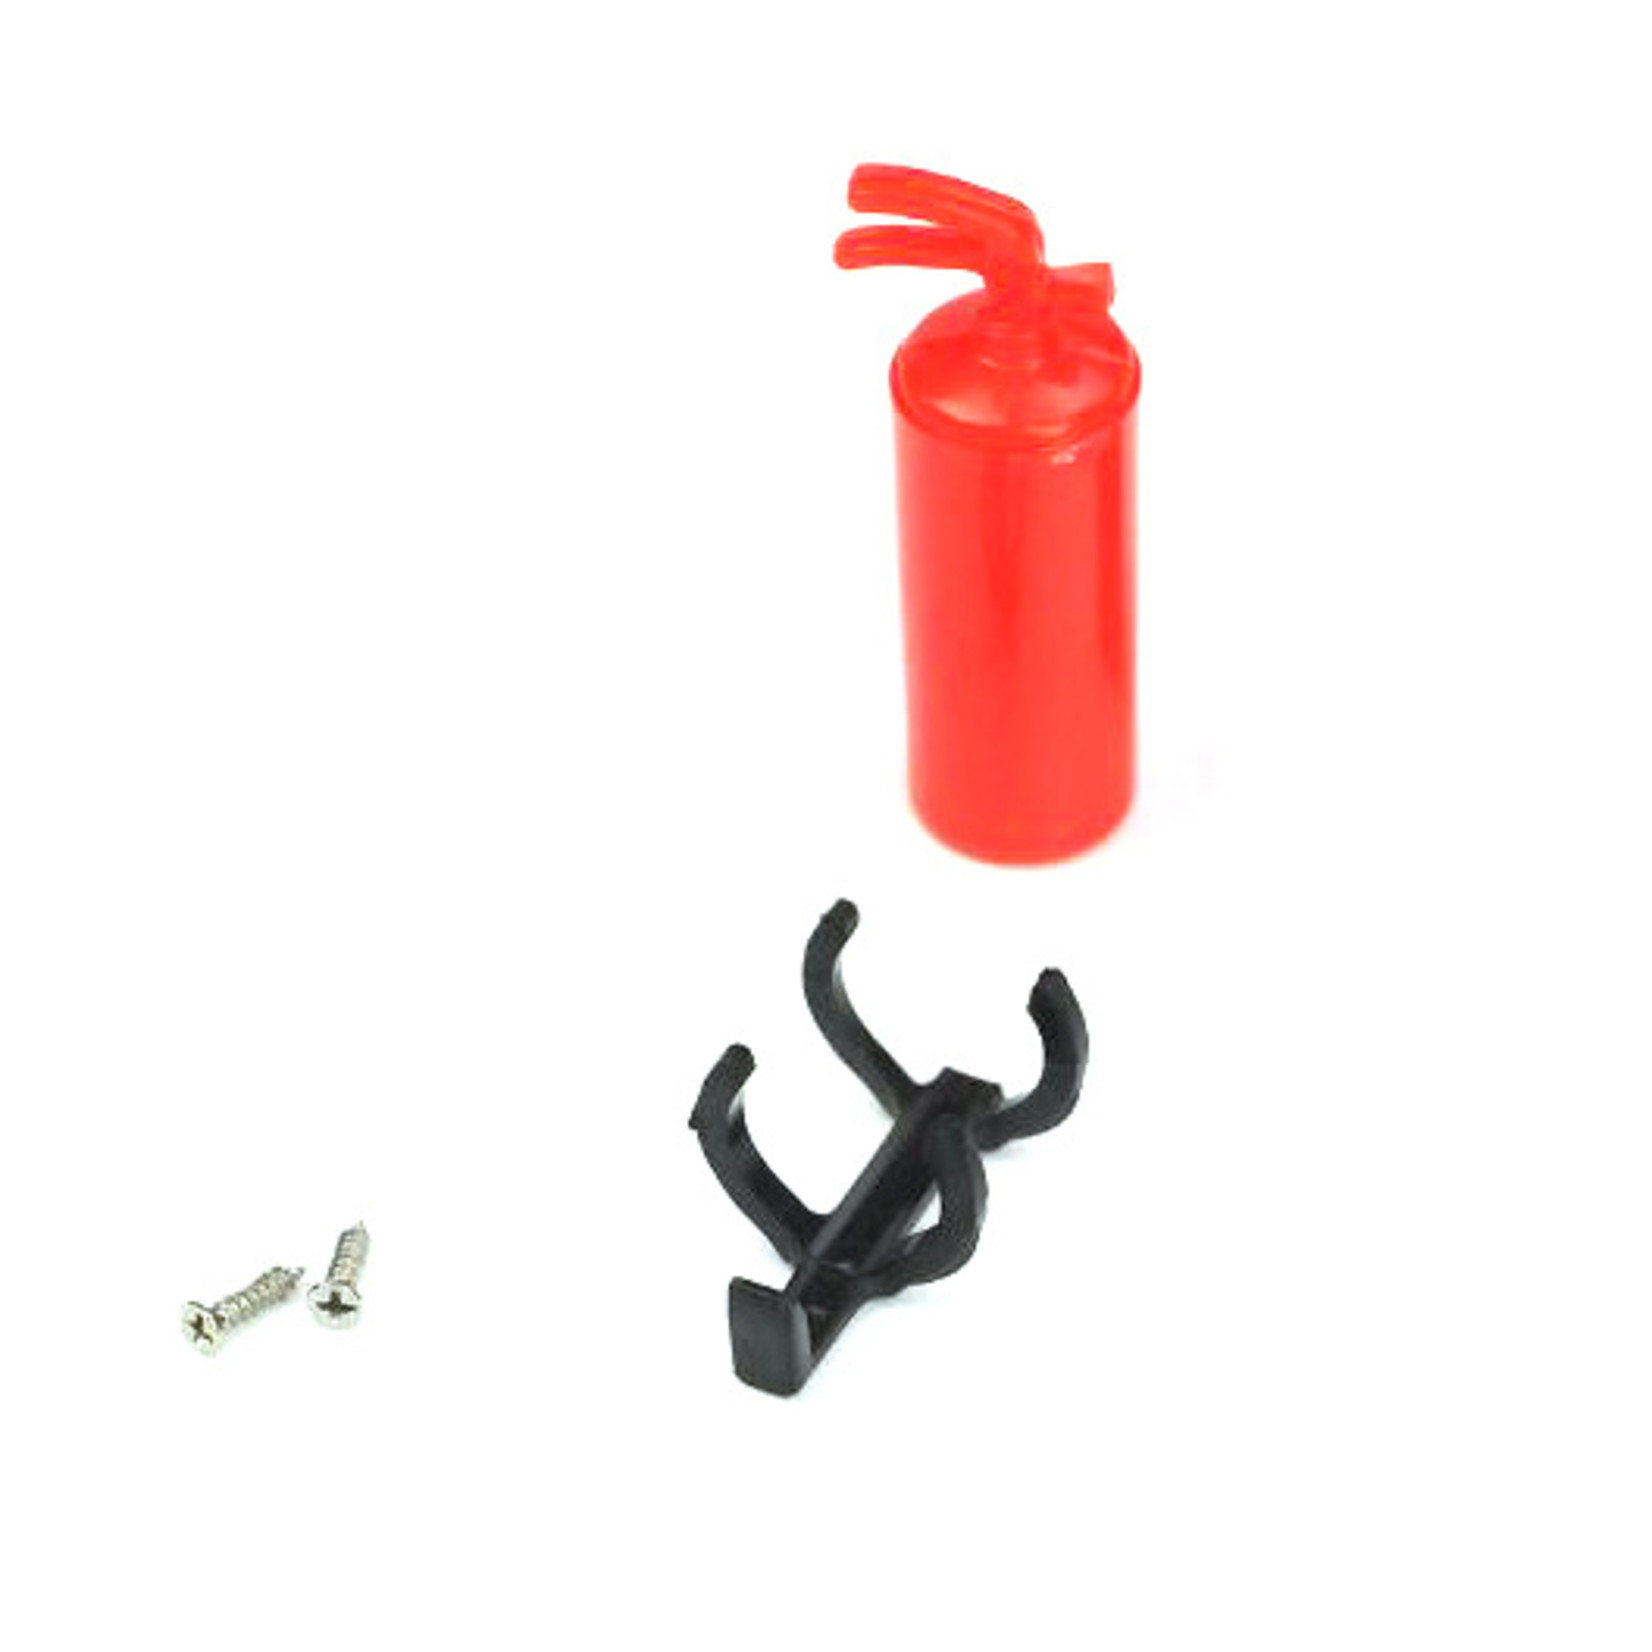 Cross RC 1/10 Scale Fire Extinguisher Kit